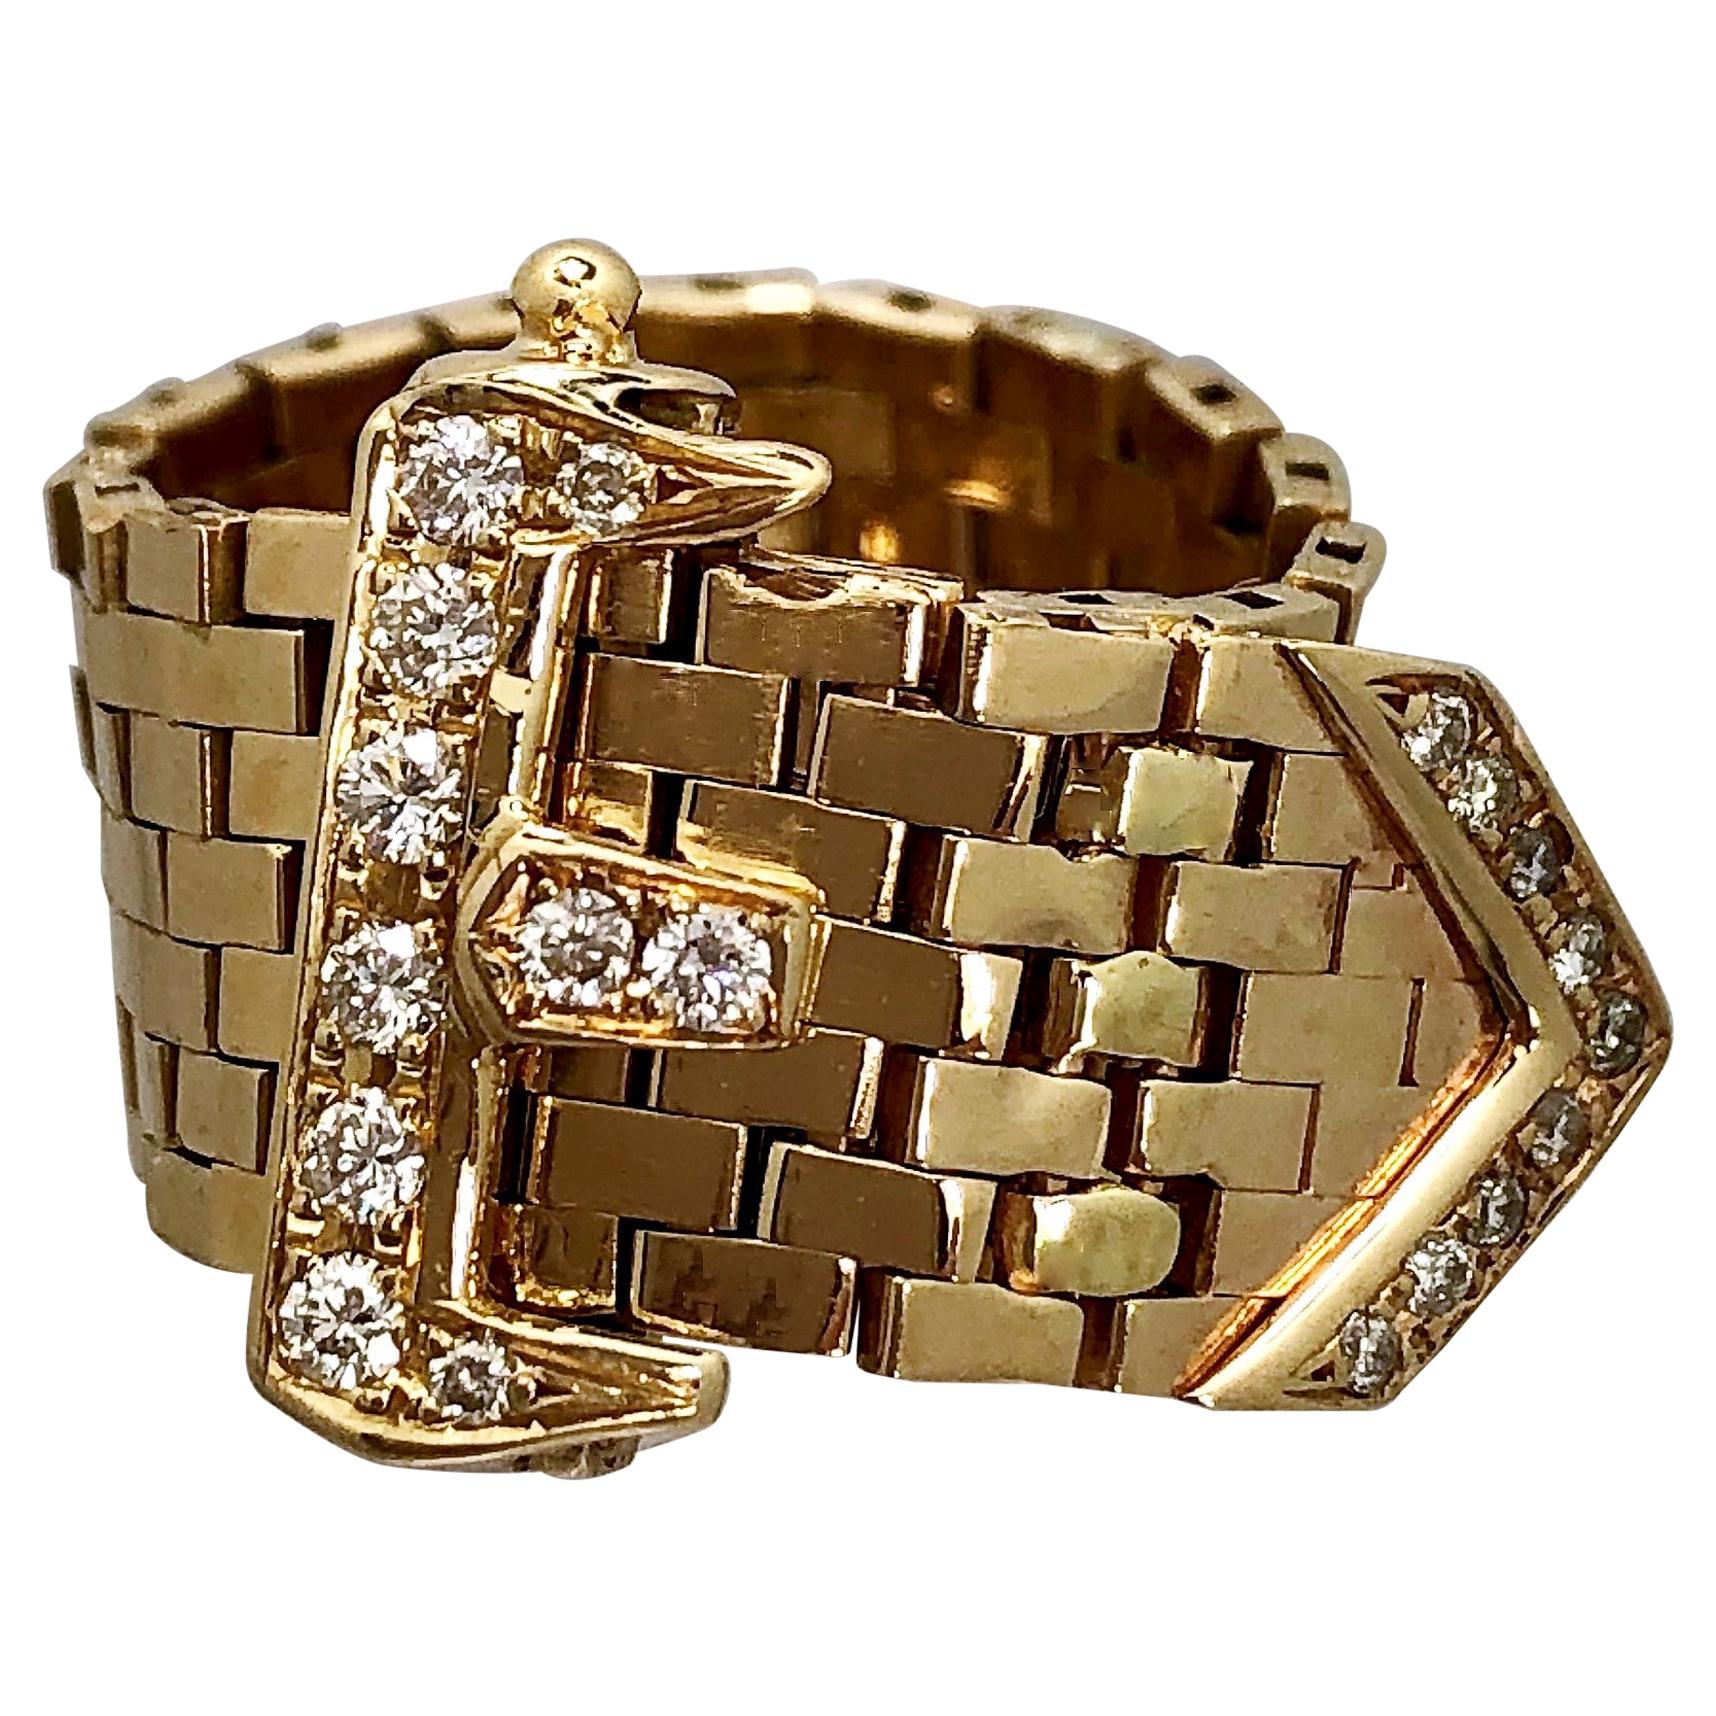 Midcentury Brick Style, Flexible Gold Buckle Ring with Diamonds